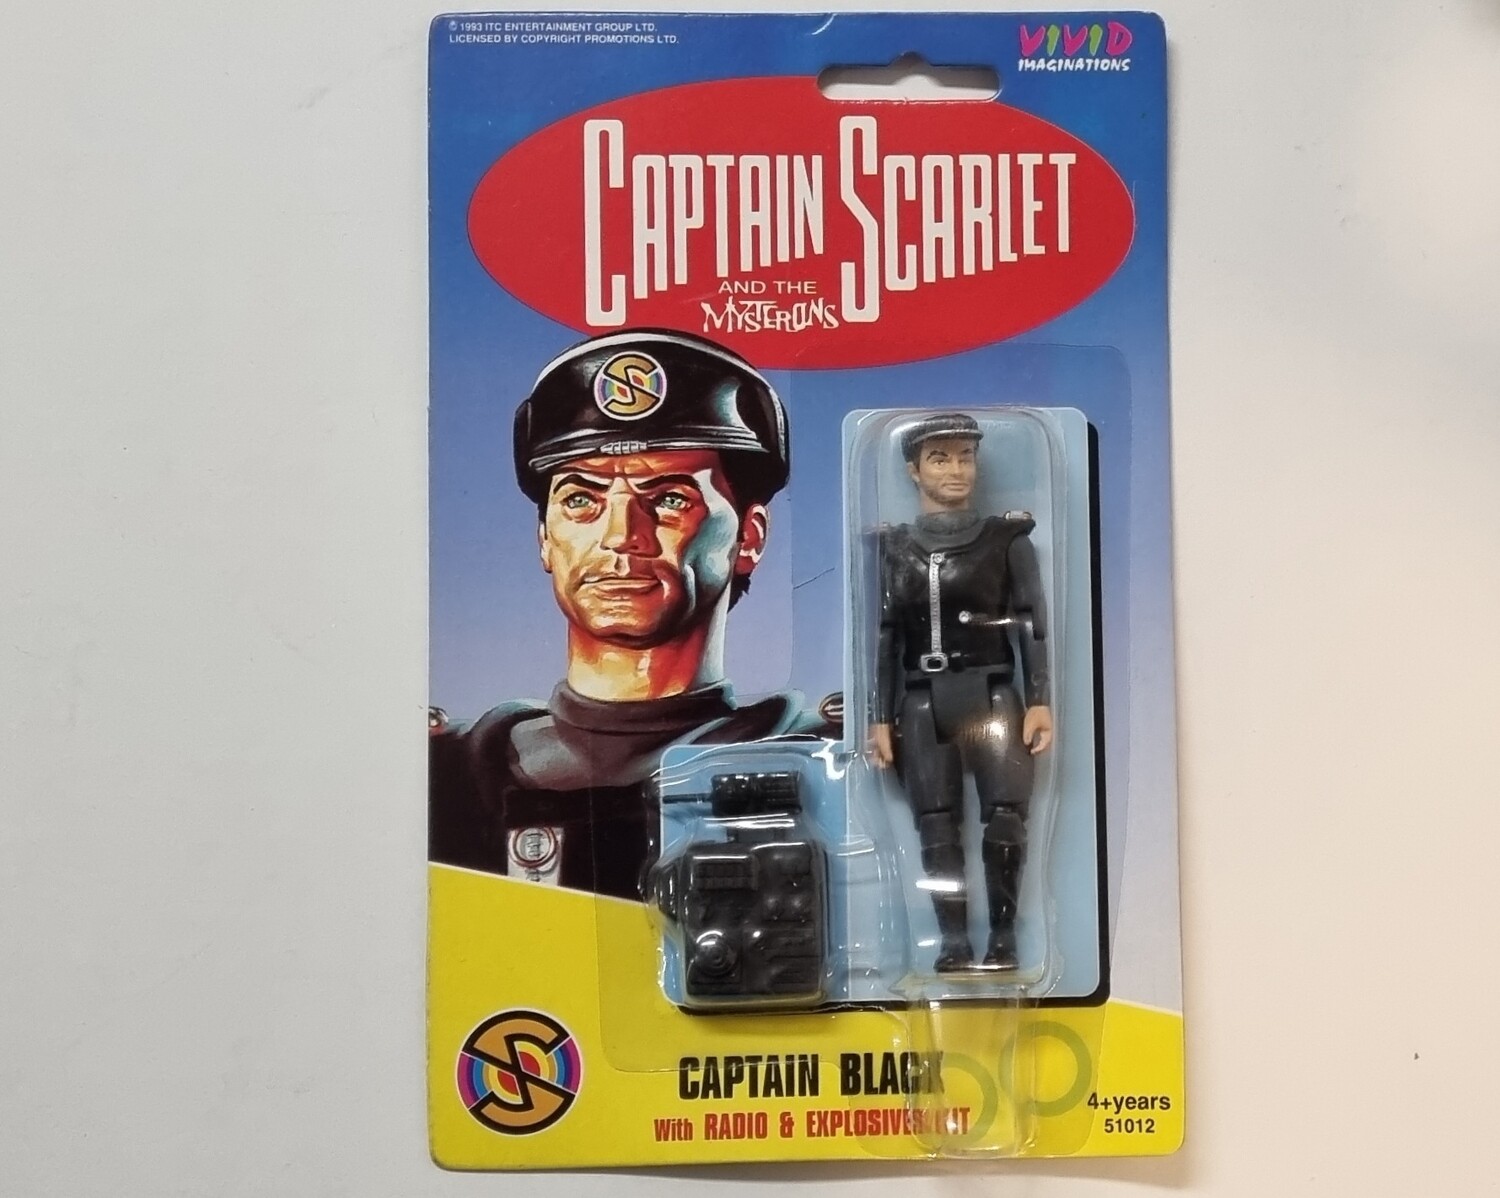 Actiefiguur, Captain Black with radio & explosives kit, Captain Scarlet and the Mysterons